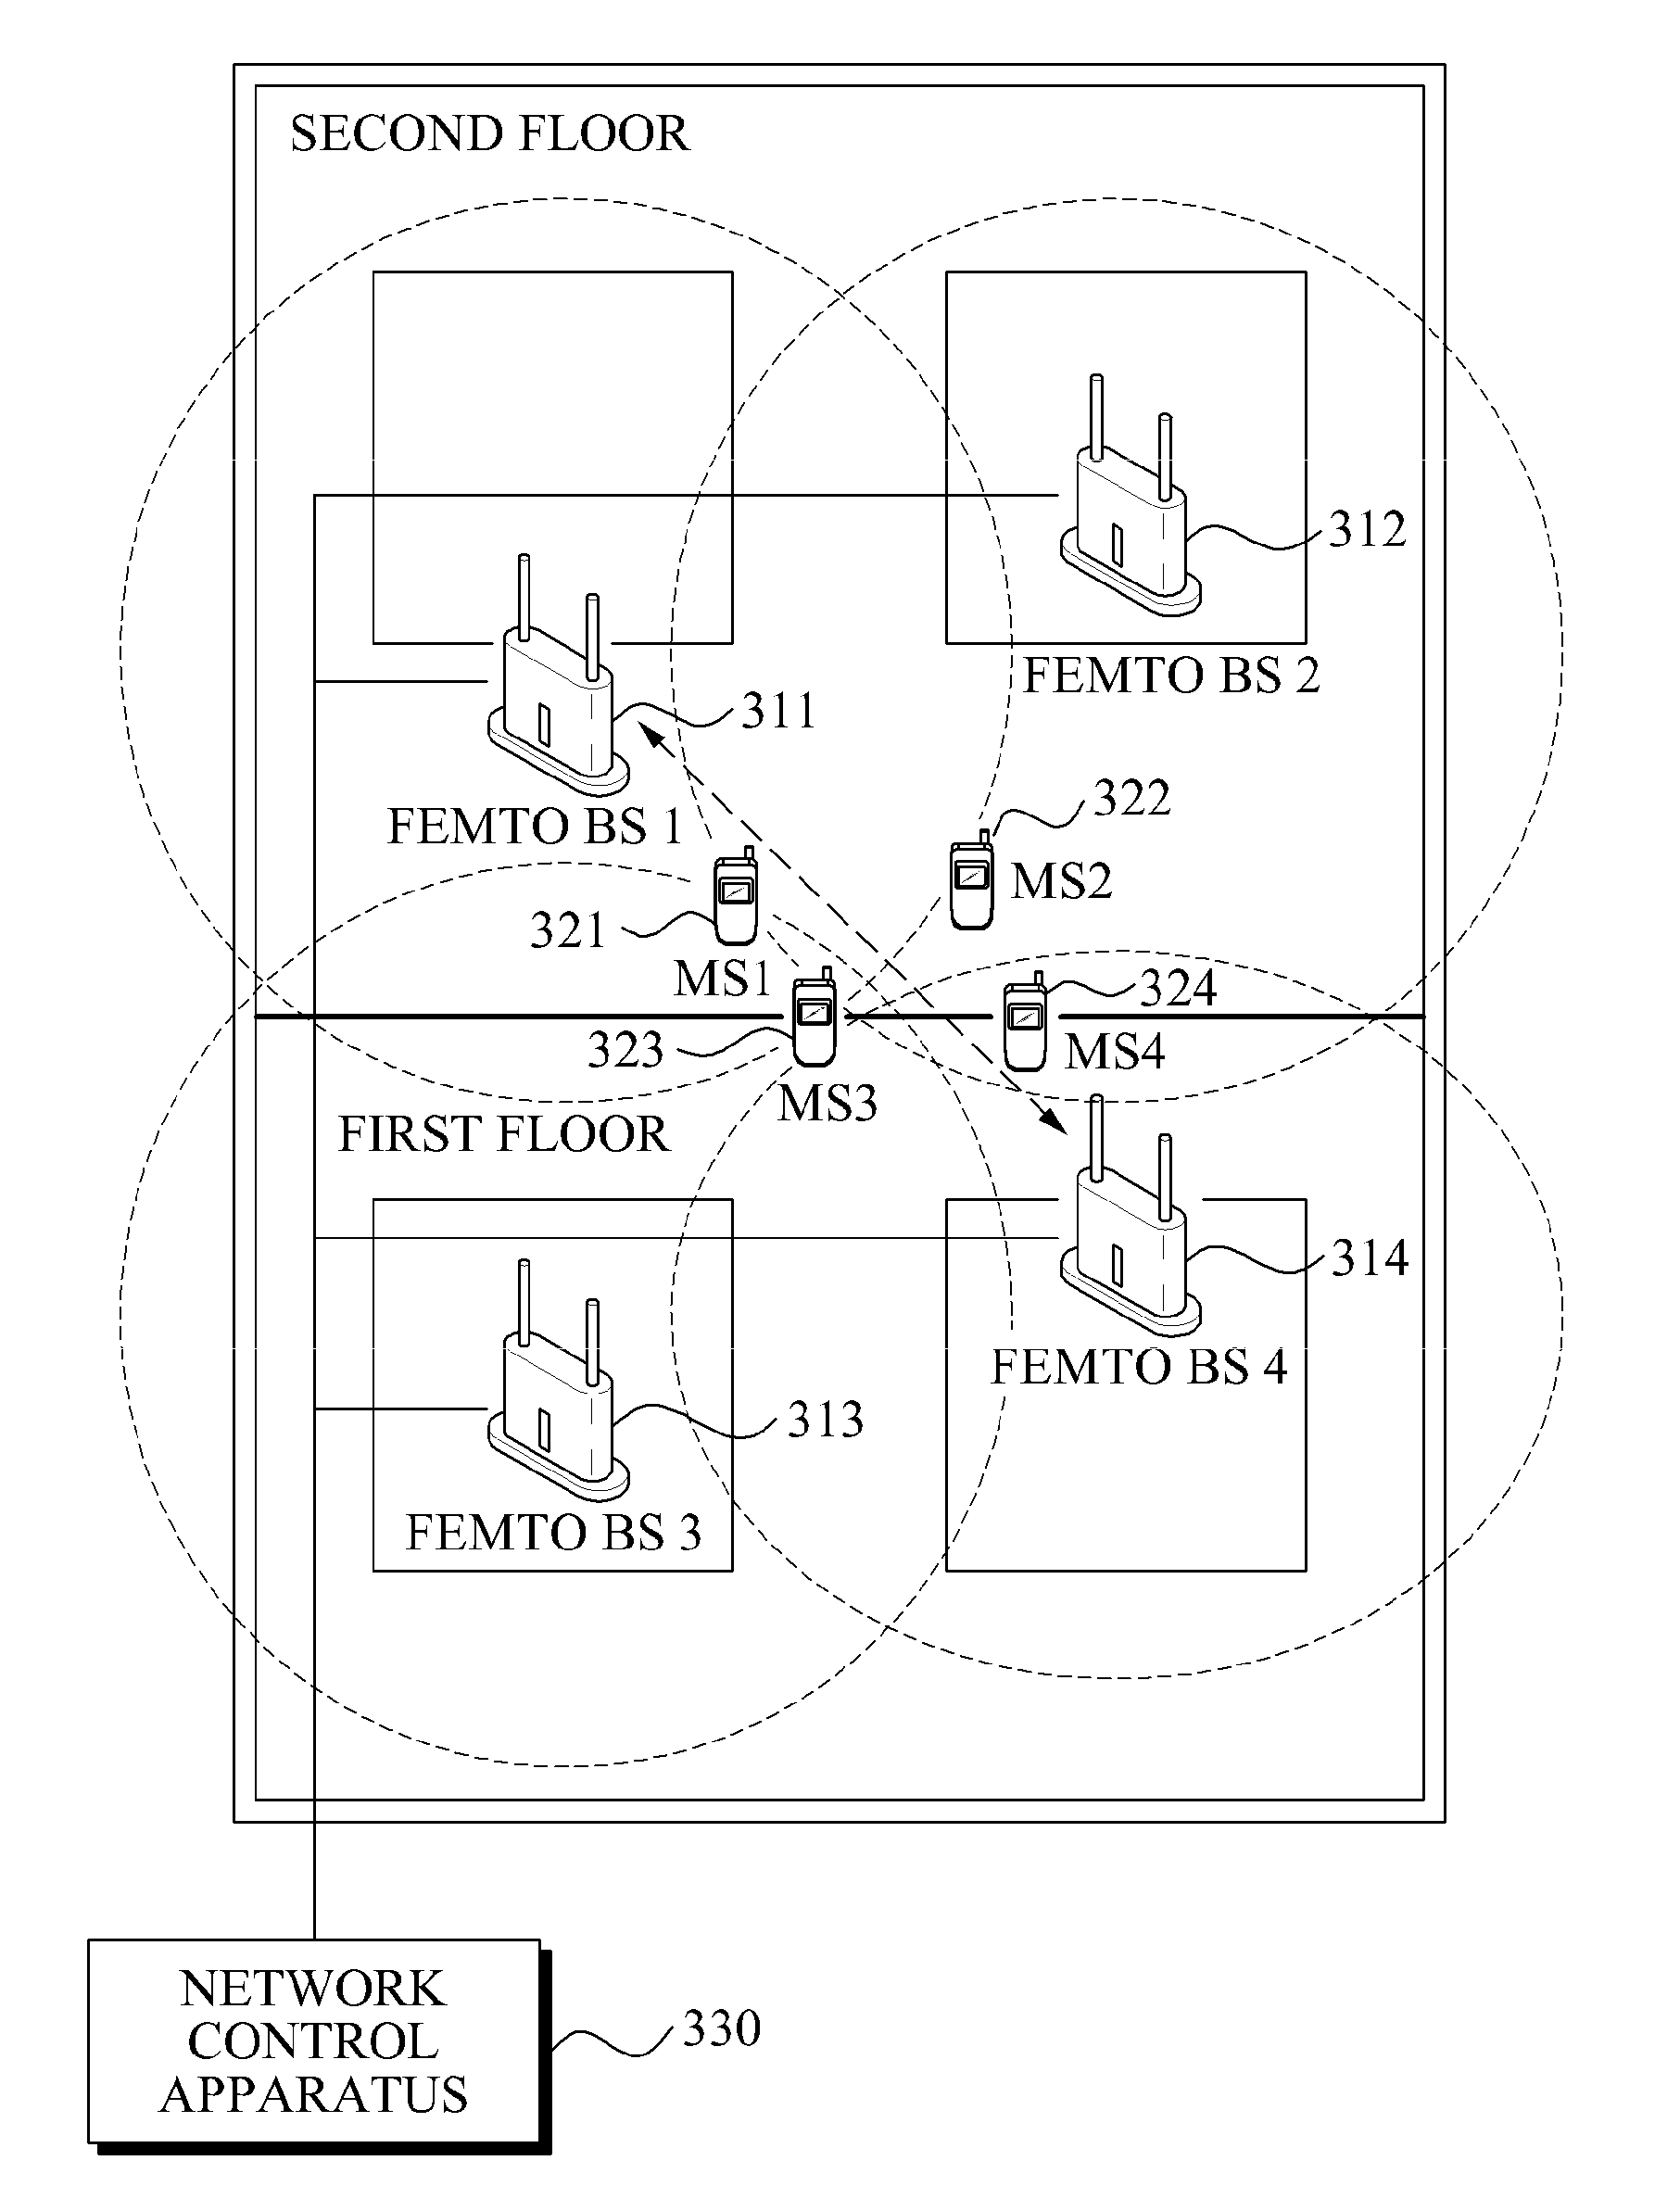 Adaptive interference alignment precoding and decoding to prevent multi-cell interference